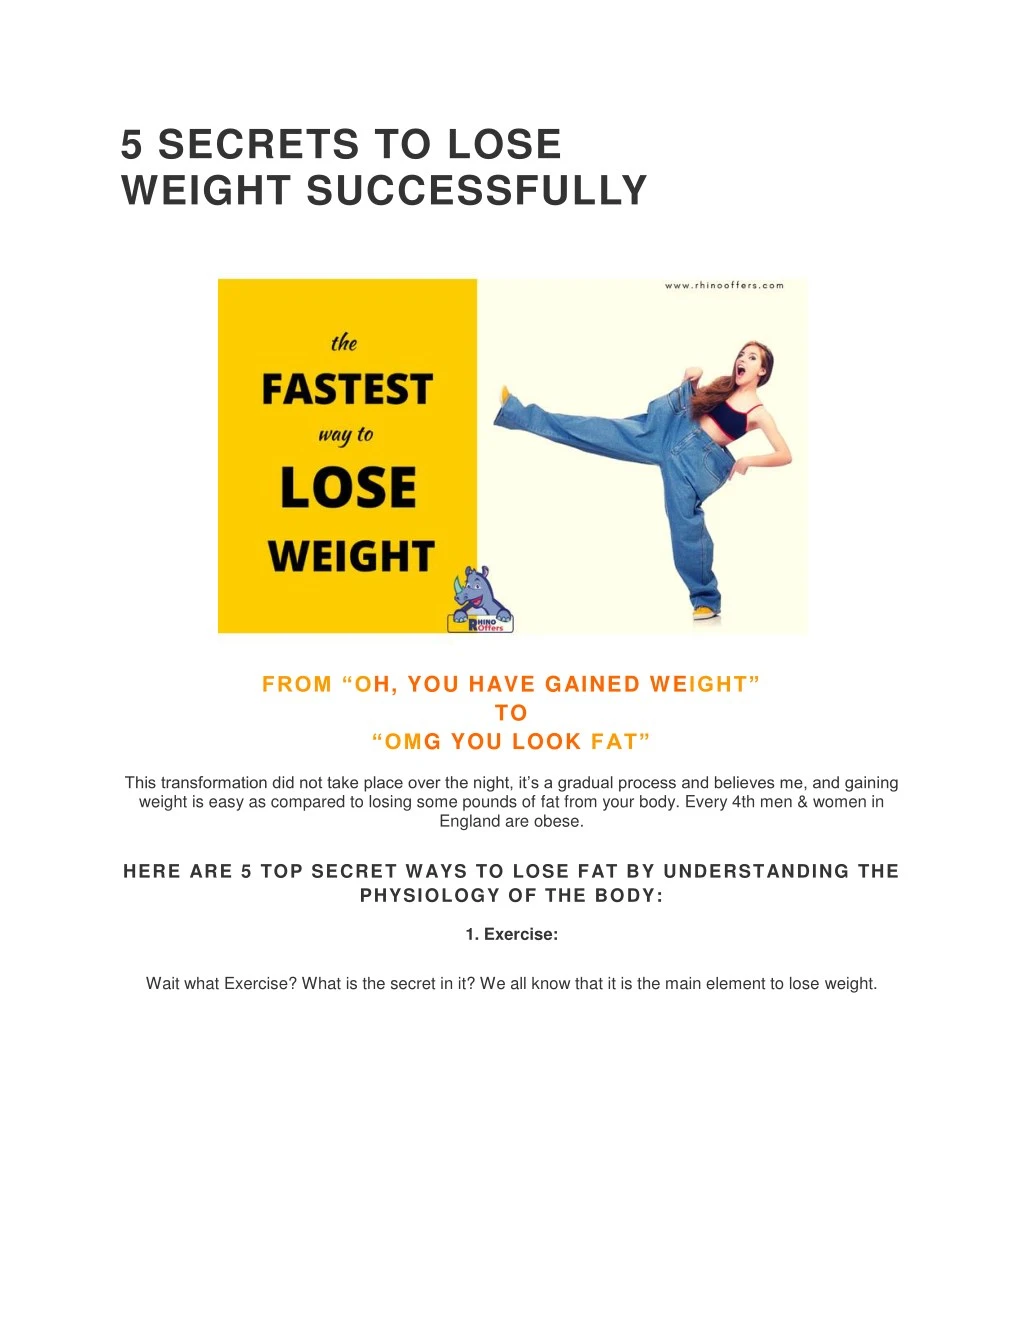 5 secrets to lose weight successfully